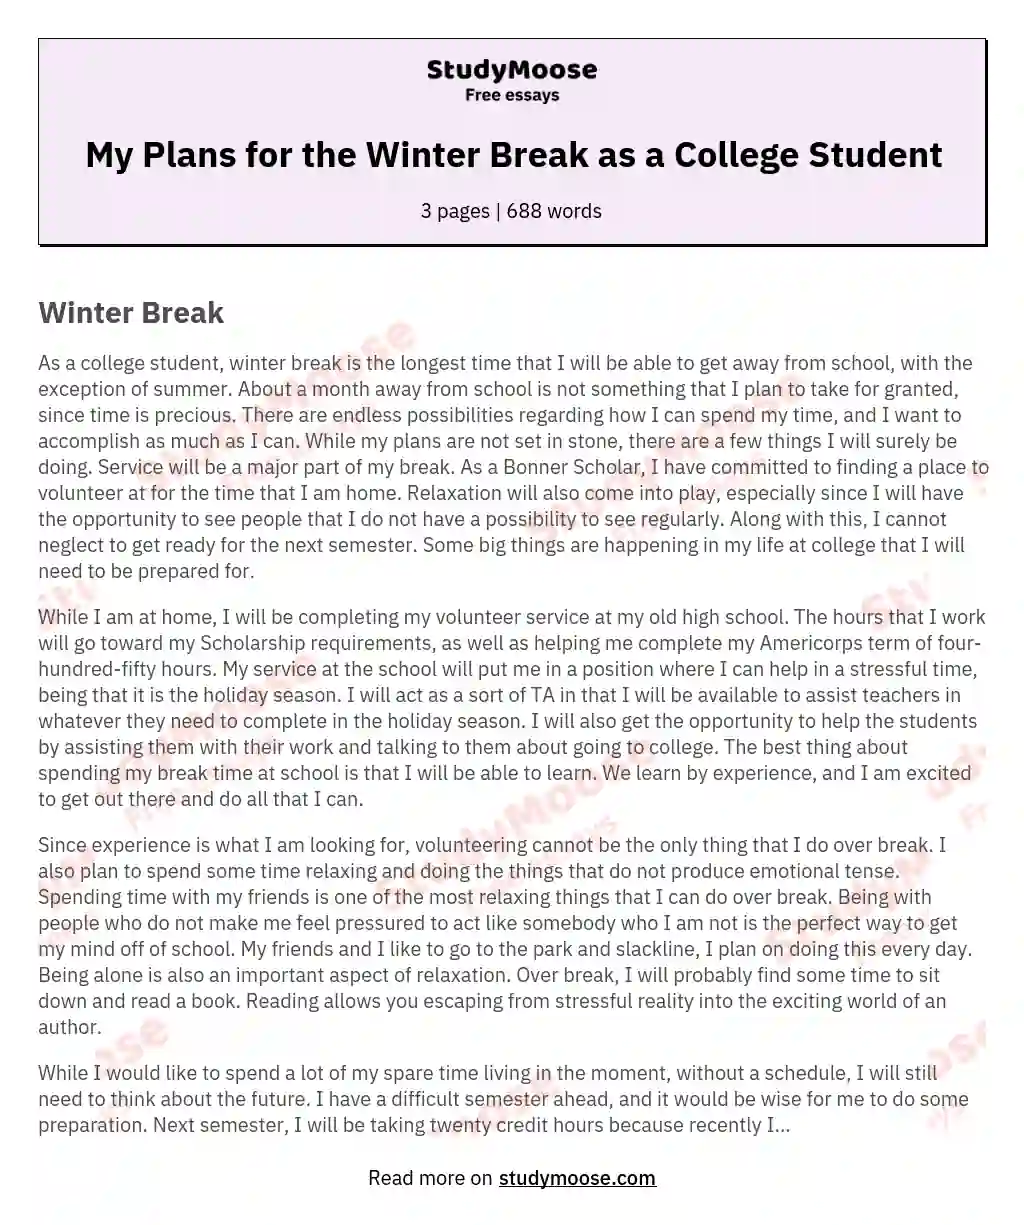 My Plans for the Winter Break as a College Student essay